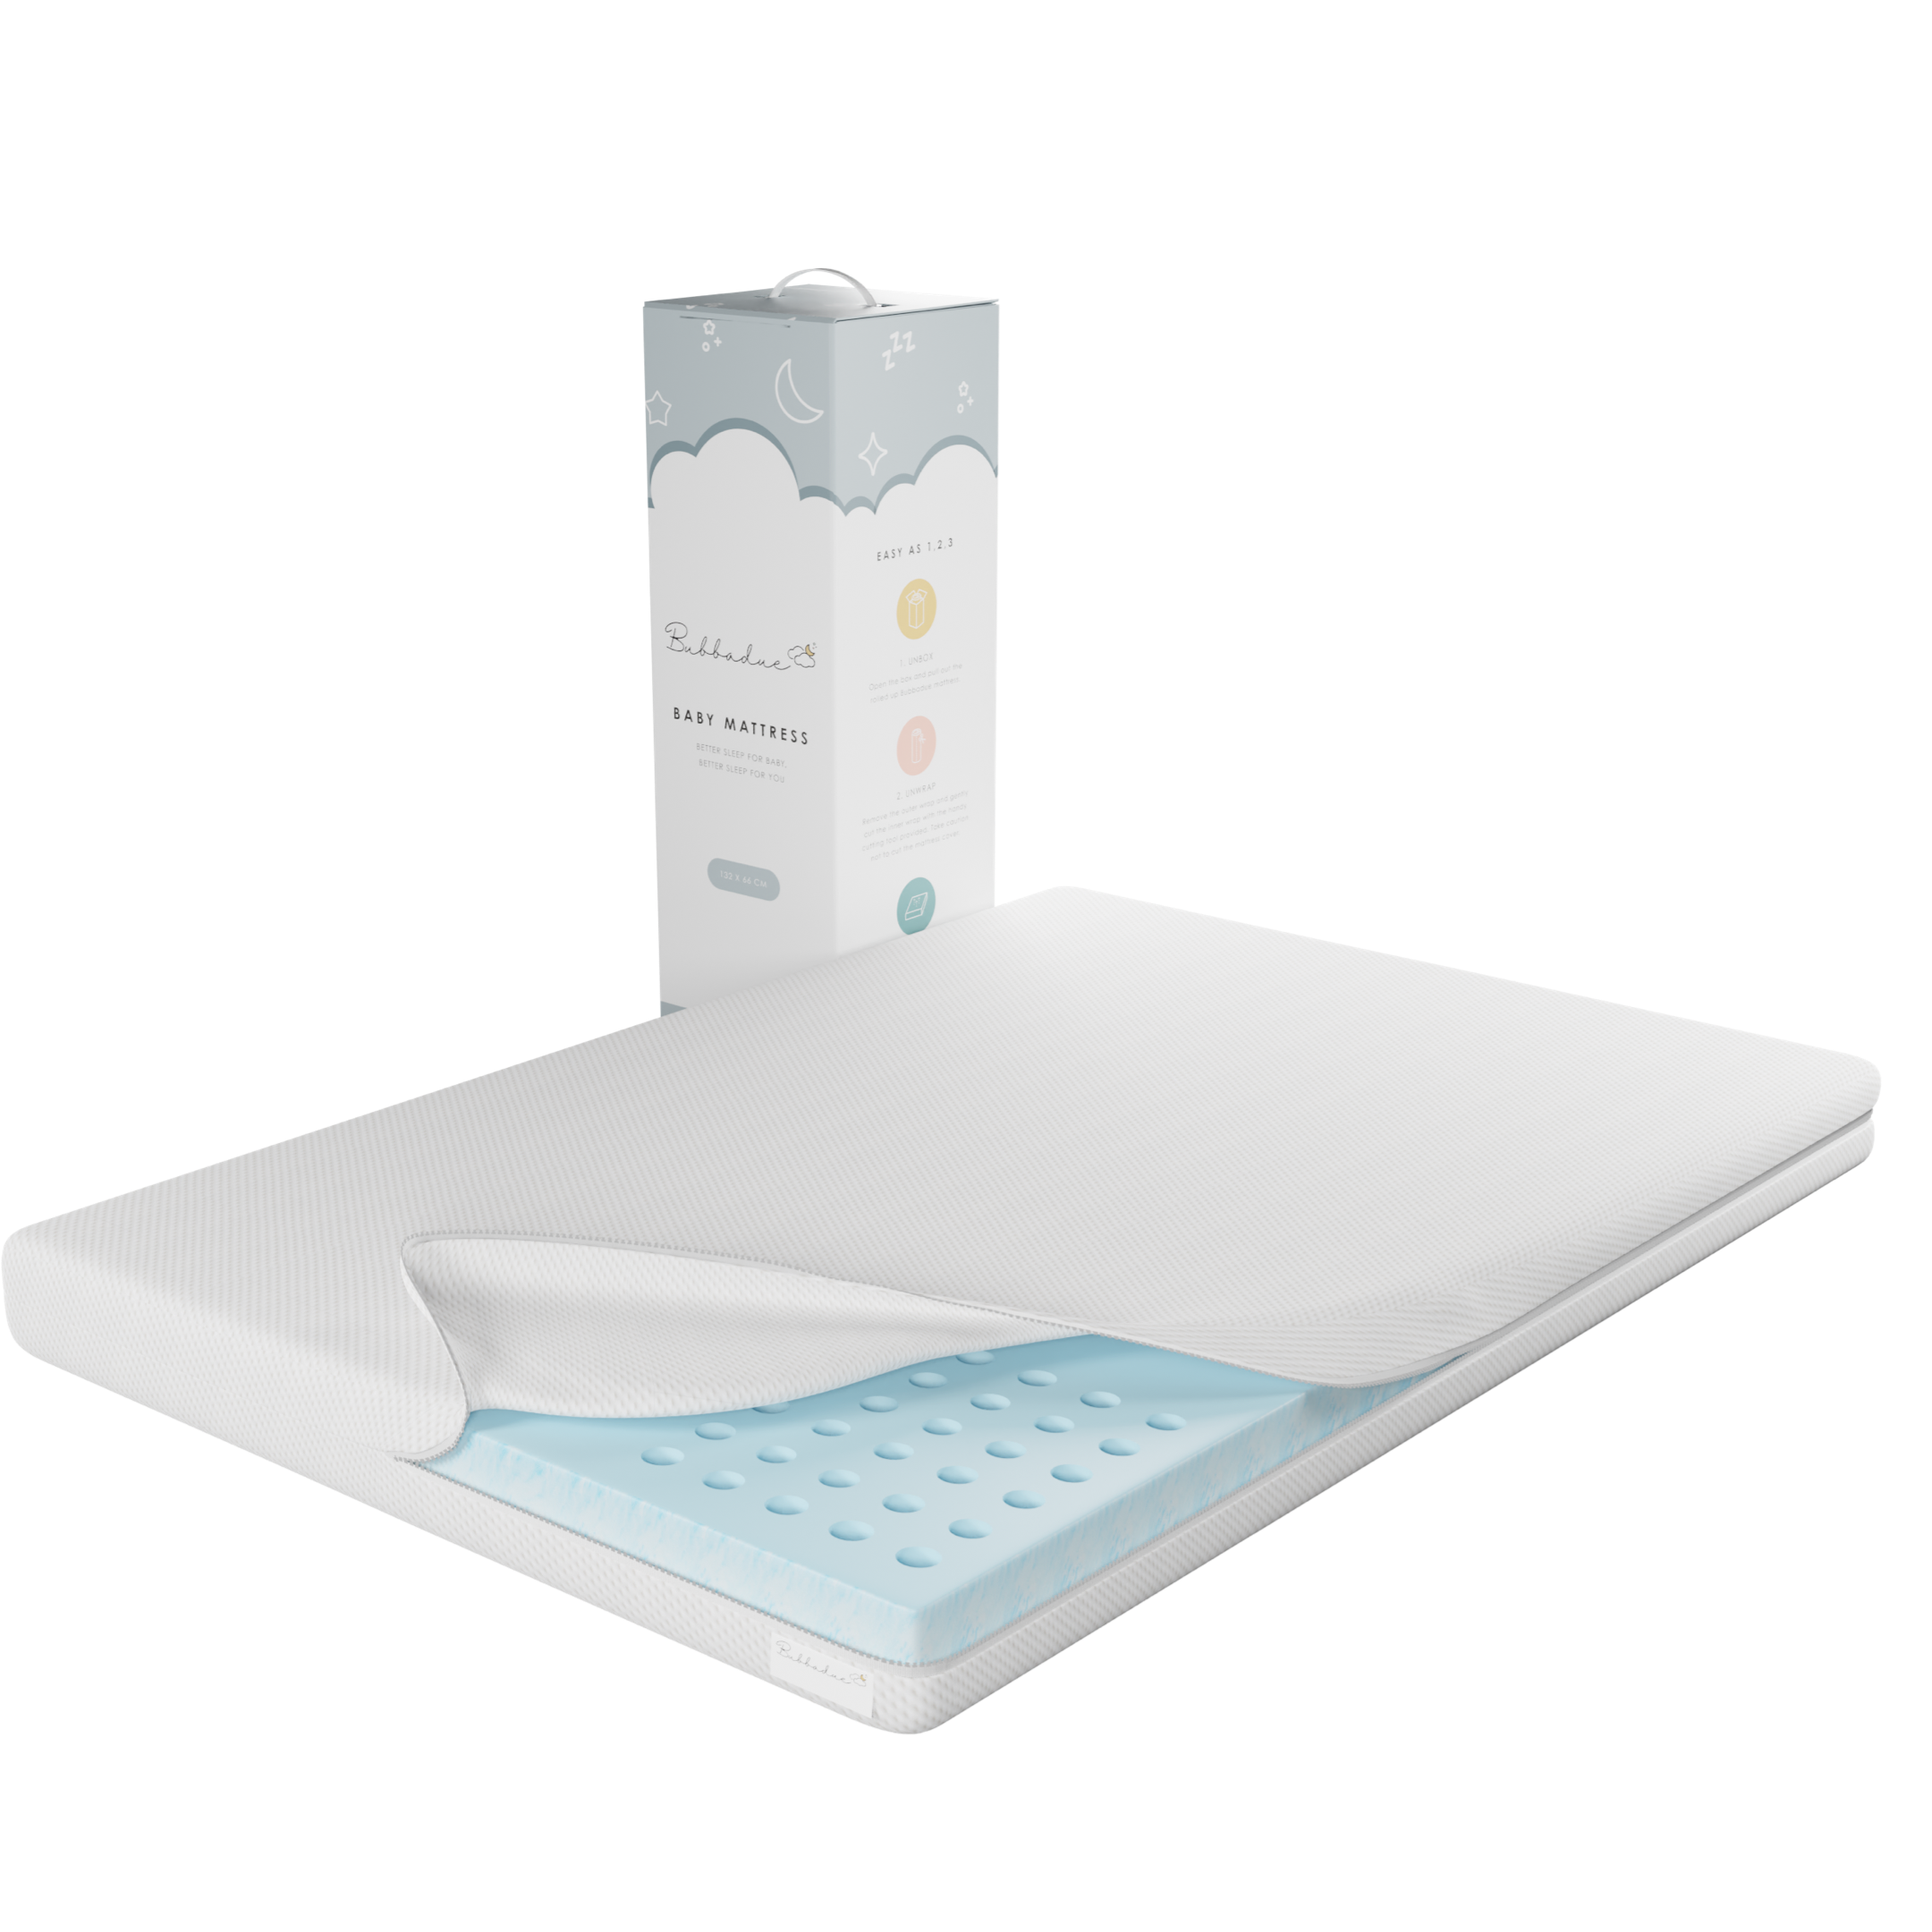 Luxury Baby Camp Cot Mattress In-A-Box (950 x 660 x 80mm) - Bubbadue